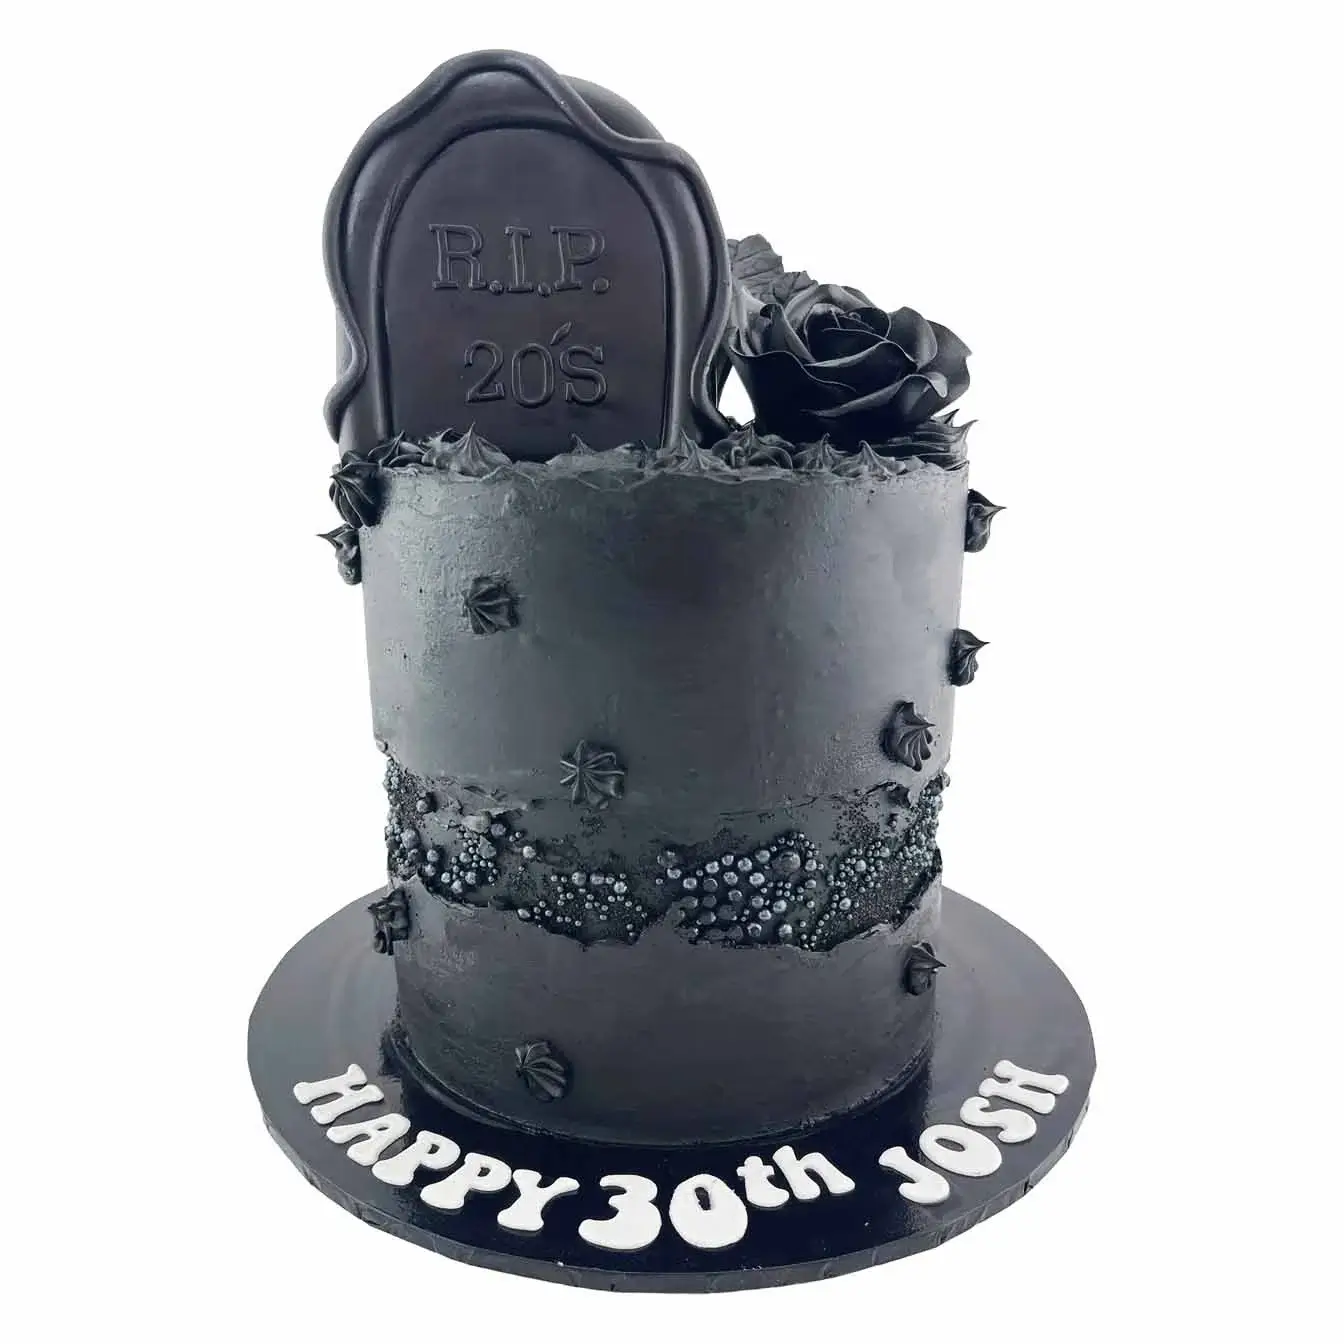 Black Tombstone Cake: RIP to 29, Welcoming 30 with a Black Rose